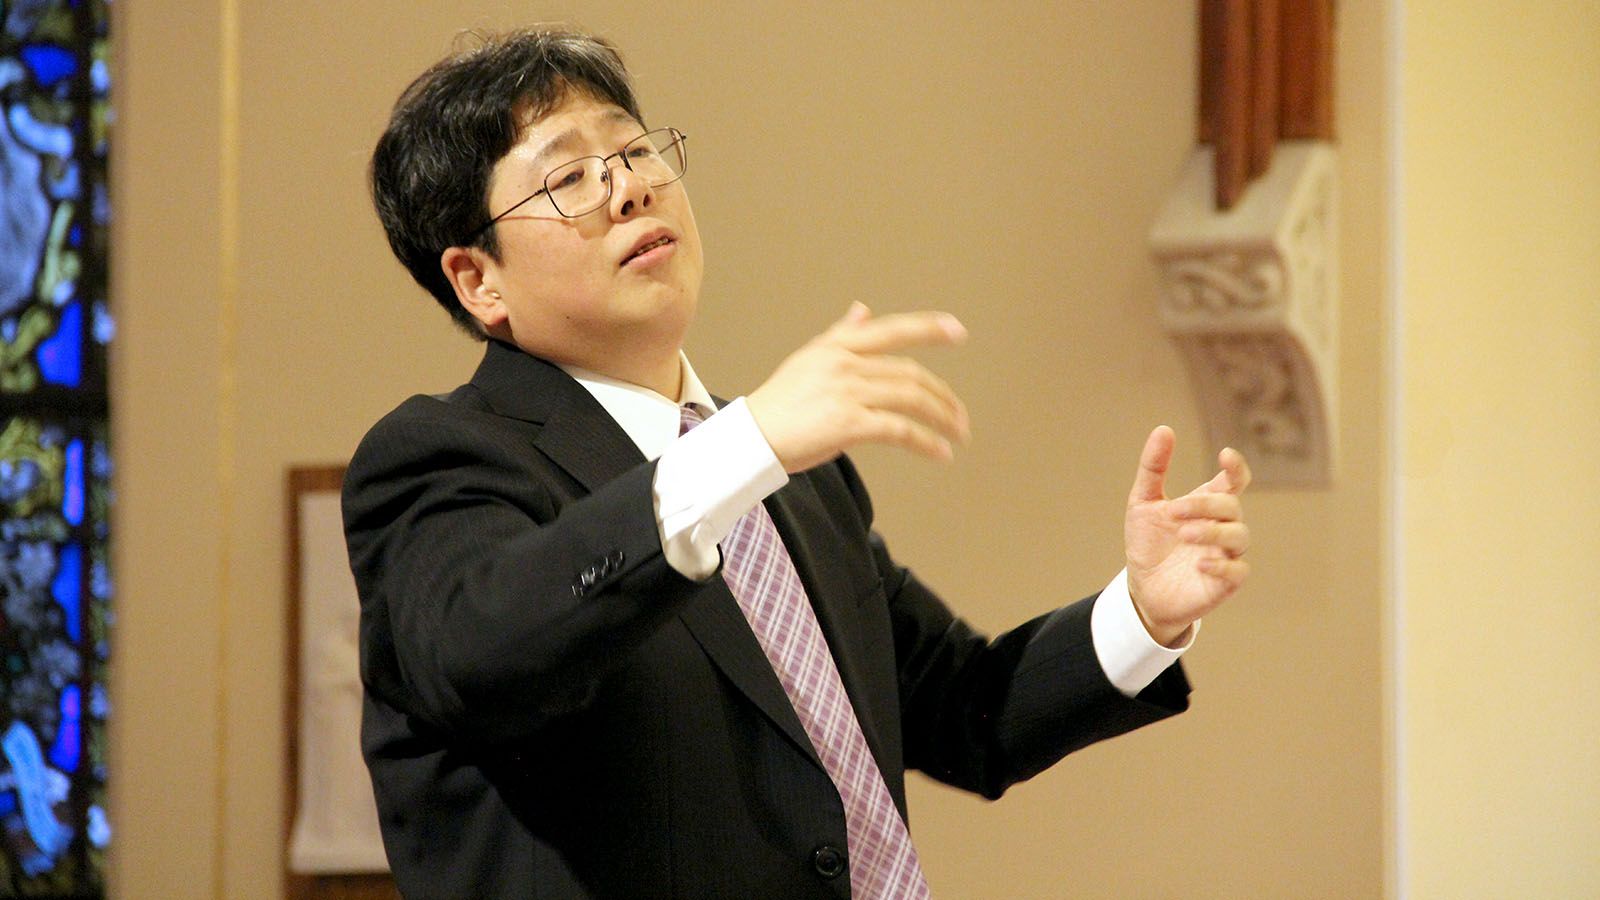 Dr. Koji Otsuki will direct the Bach Collegium for their final concert of the season on Sunday, April 23, at St. Francis Chapel at the University of Saint Francis.